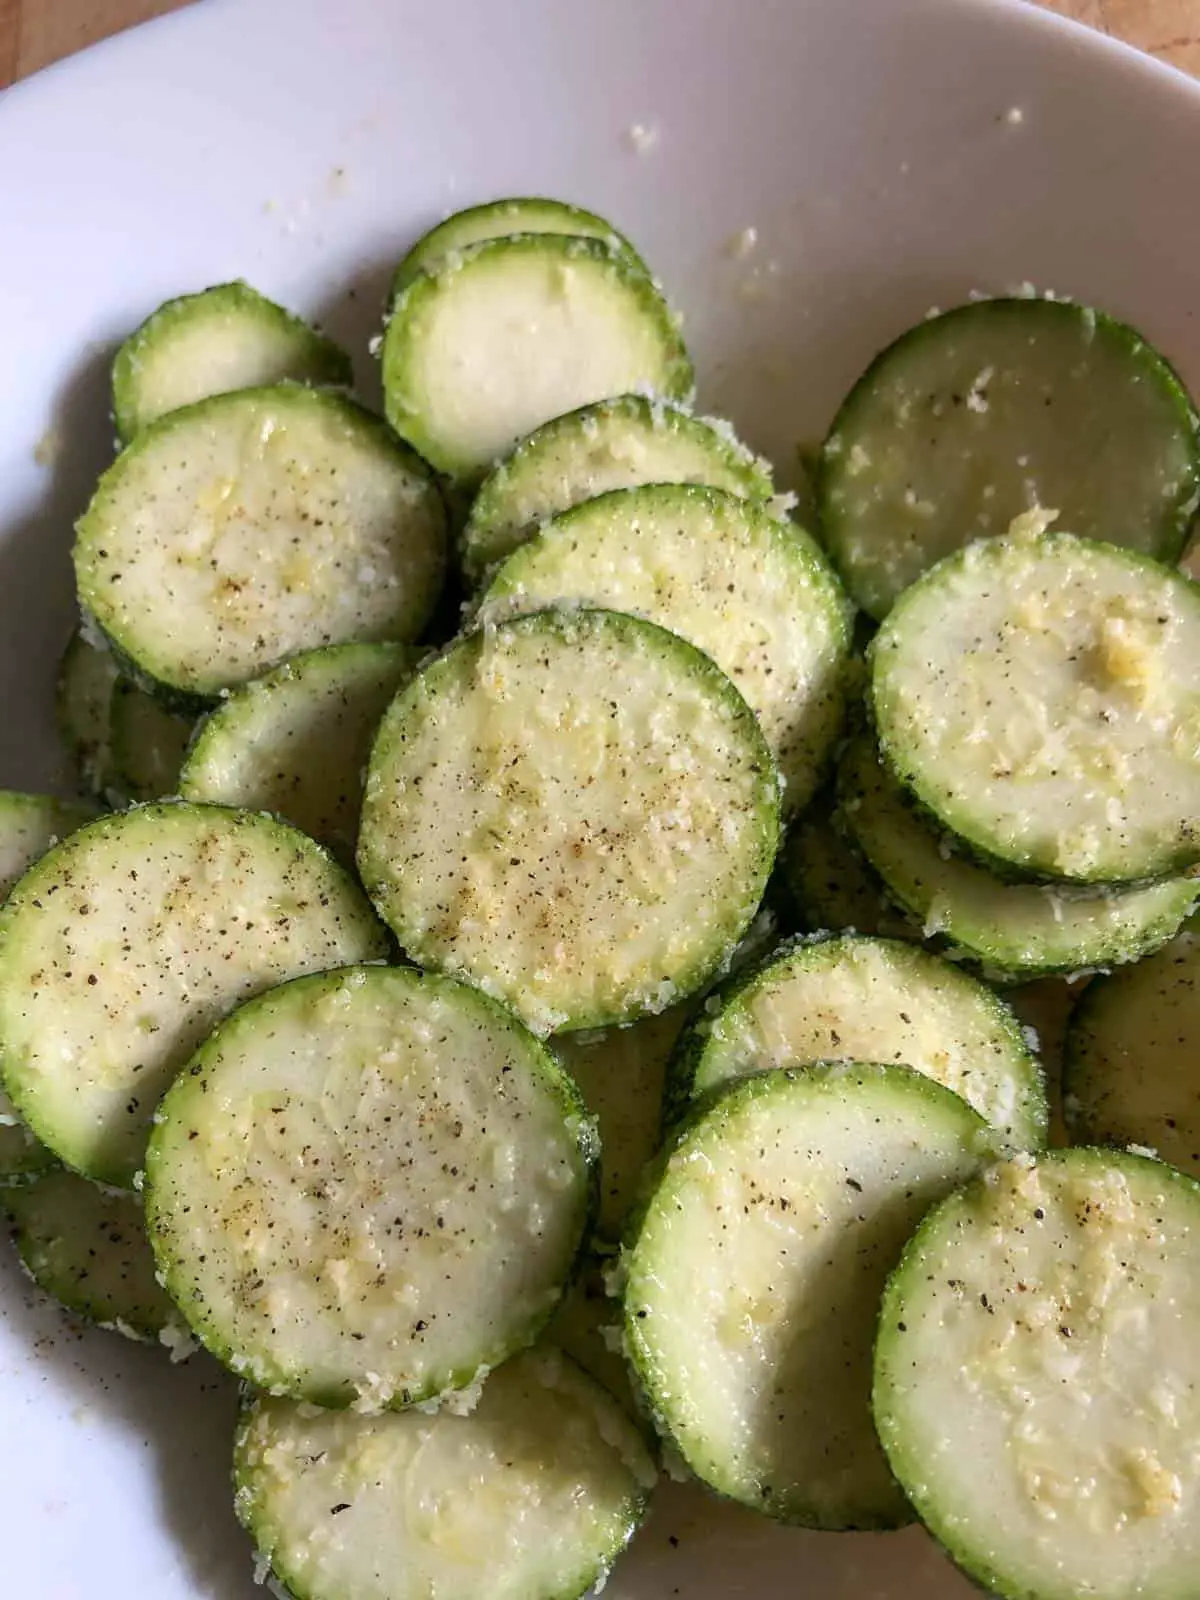 Zucchini disks coated with spices and Parmesan cheese in a white bowl.